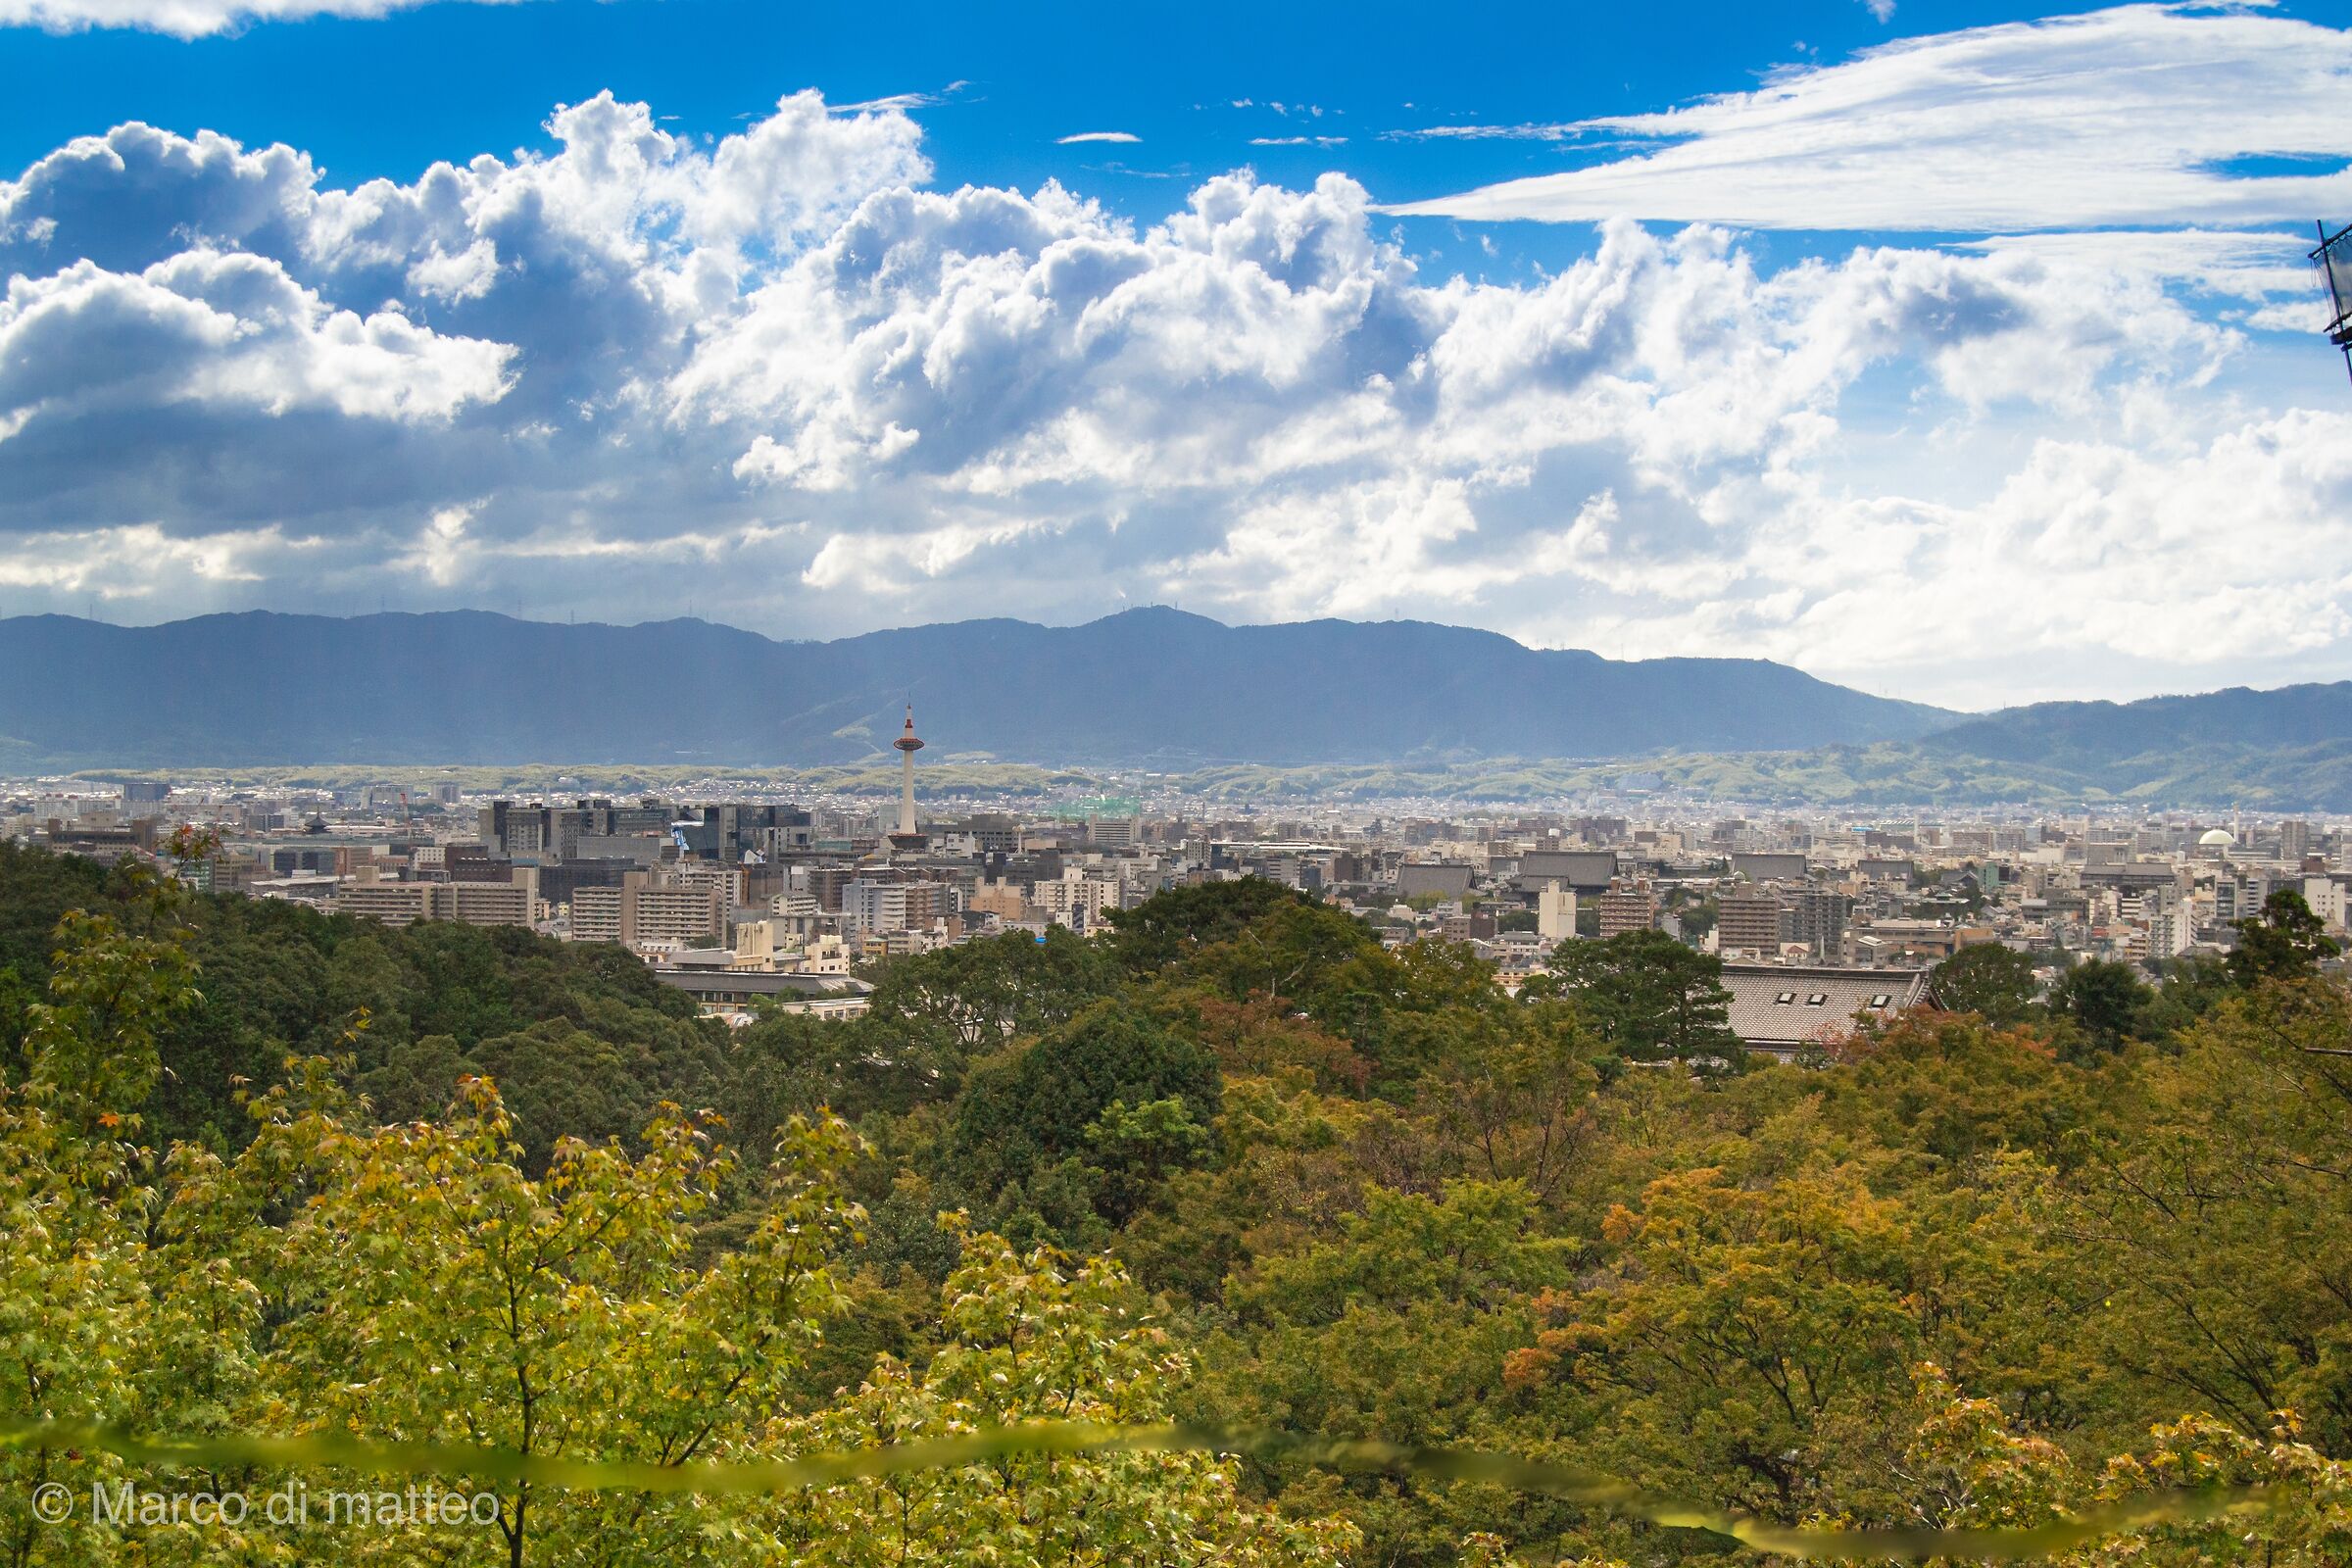 Kyoto by day...